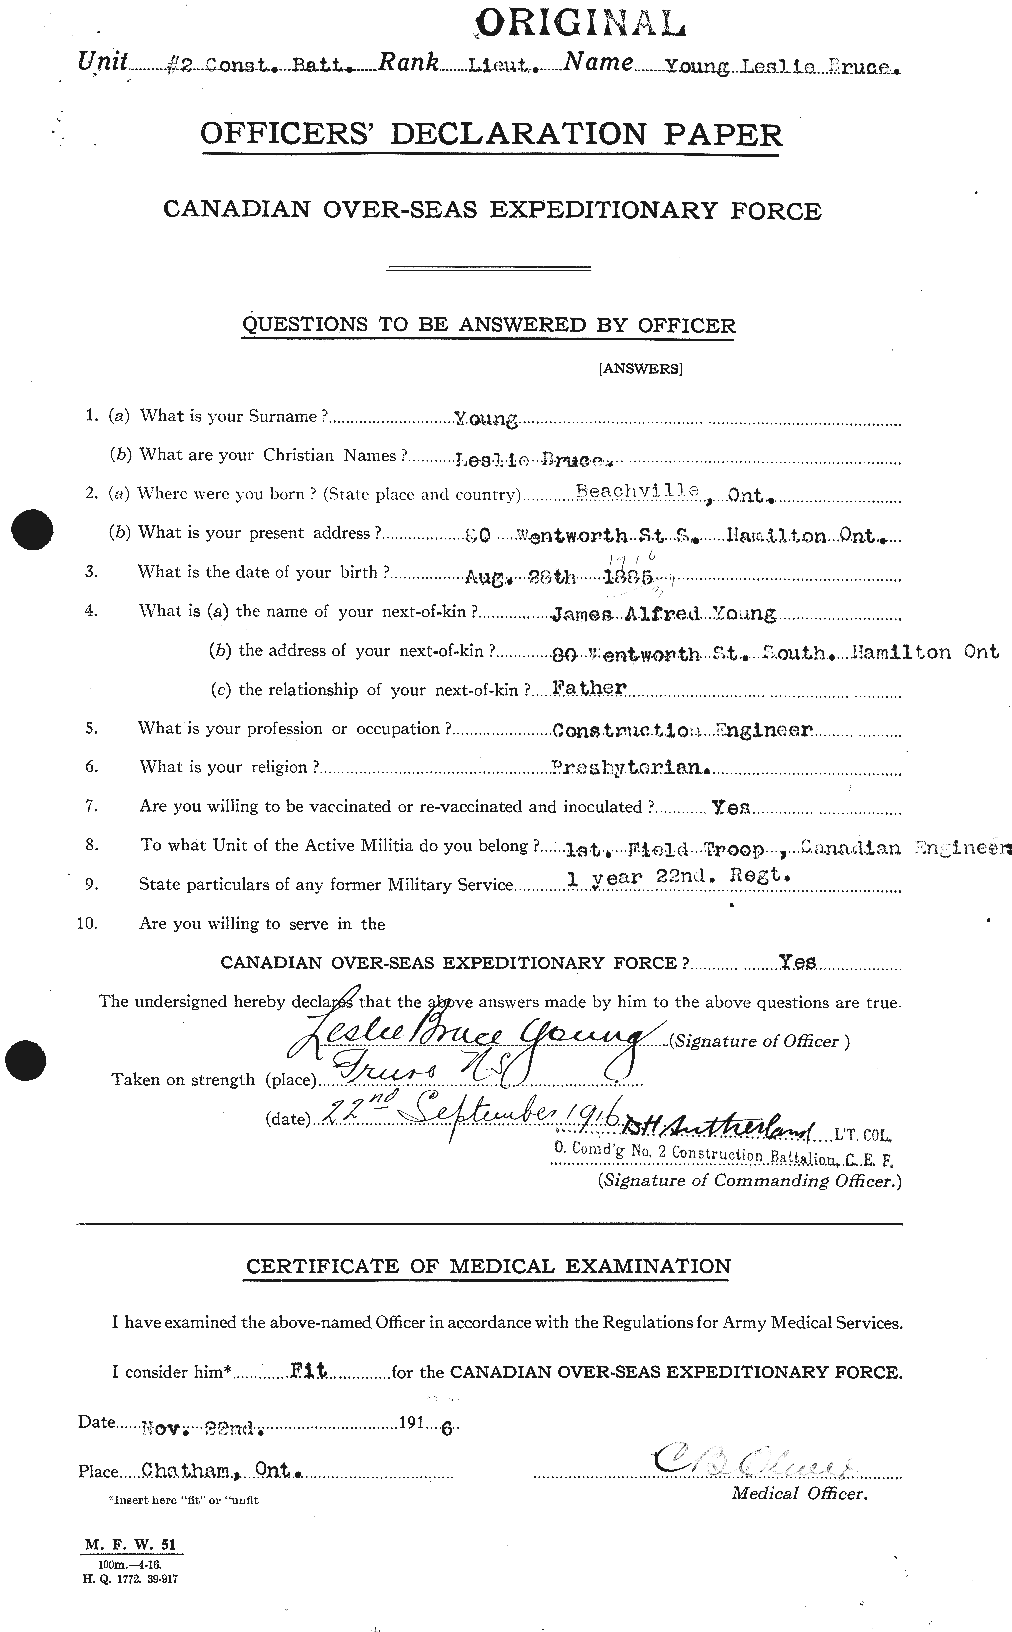 Personnel Records of the First World War - CEF 691729a